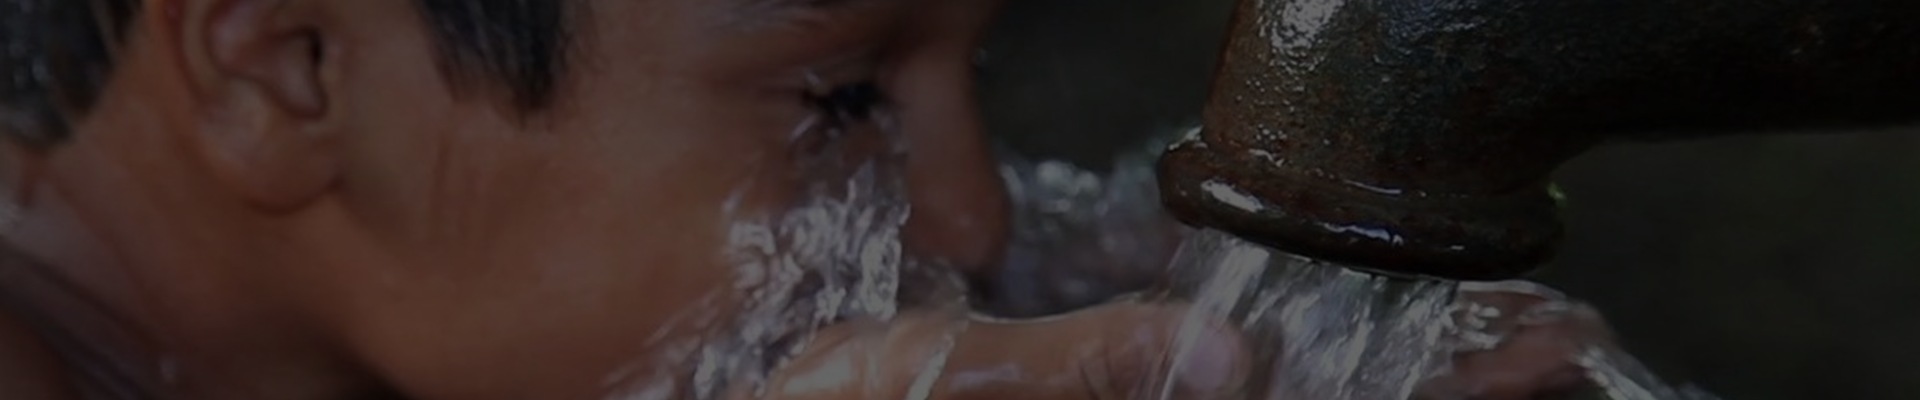 A child drinking clean water from a well